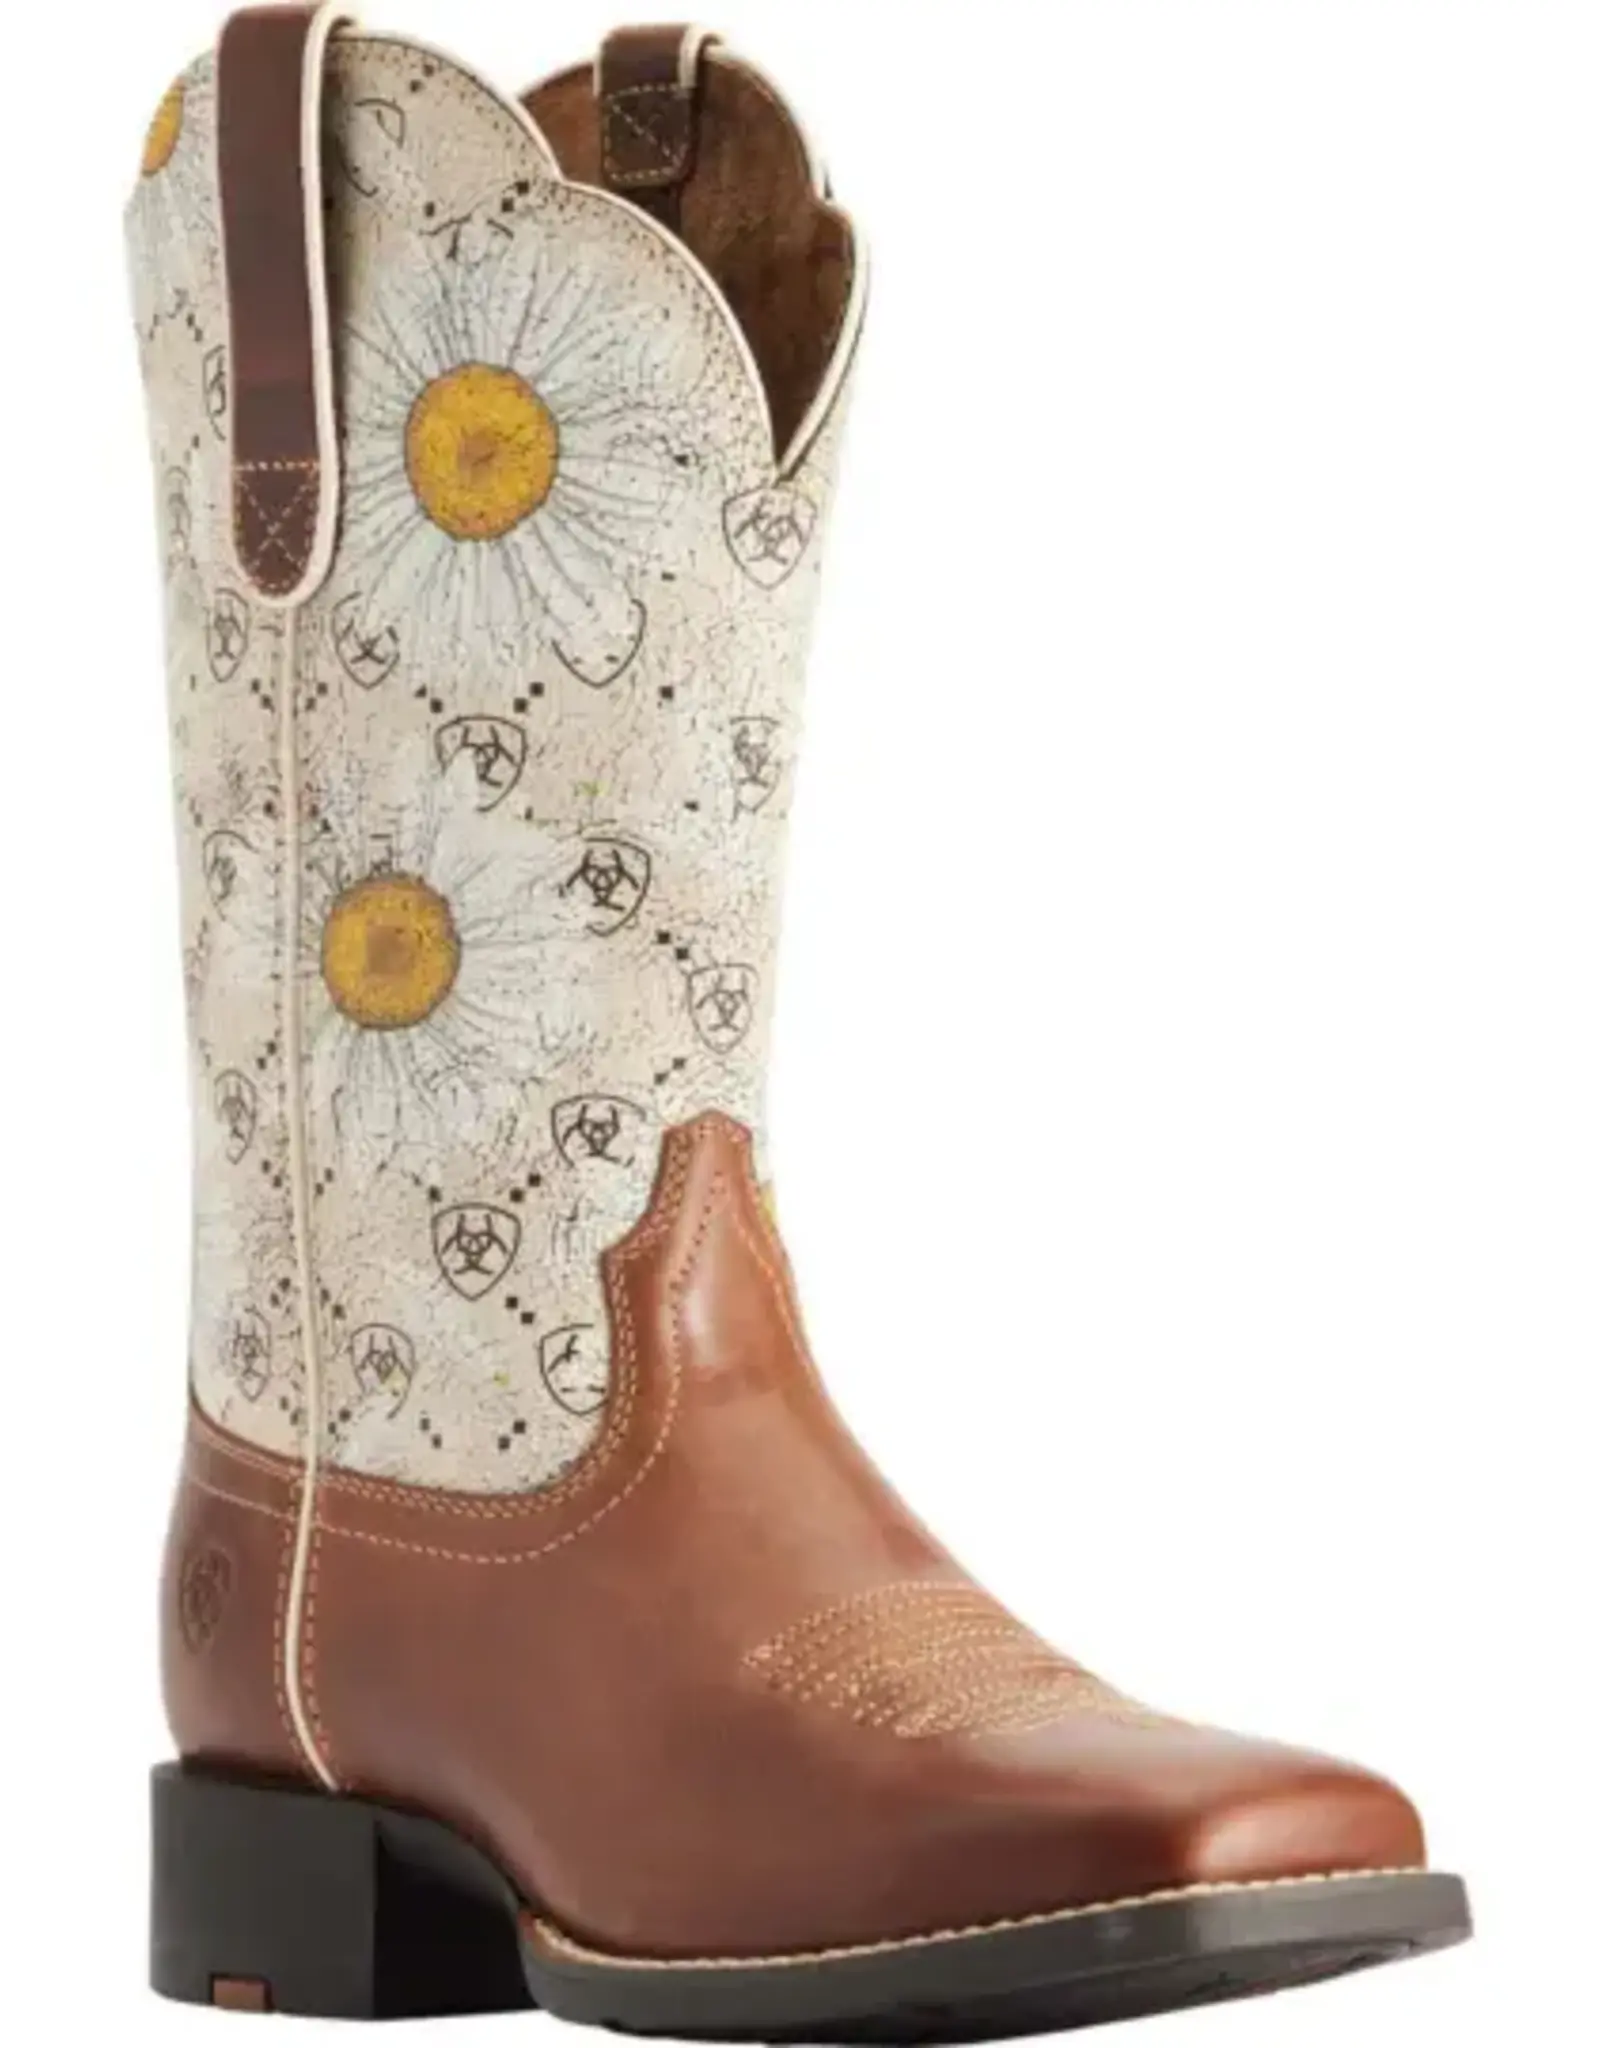 Ariat Ladies Round Up Canyon Brown/Daisy Logo Print 10046881 Western Boots